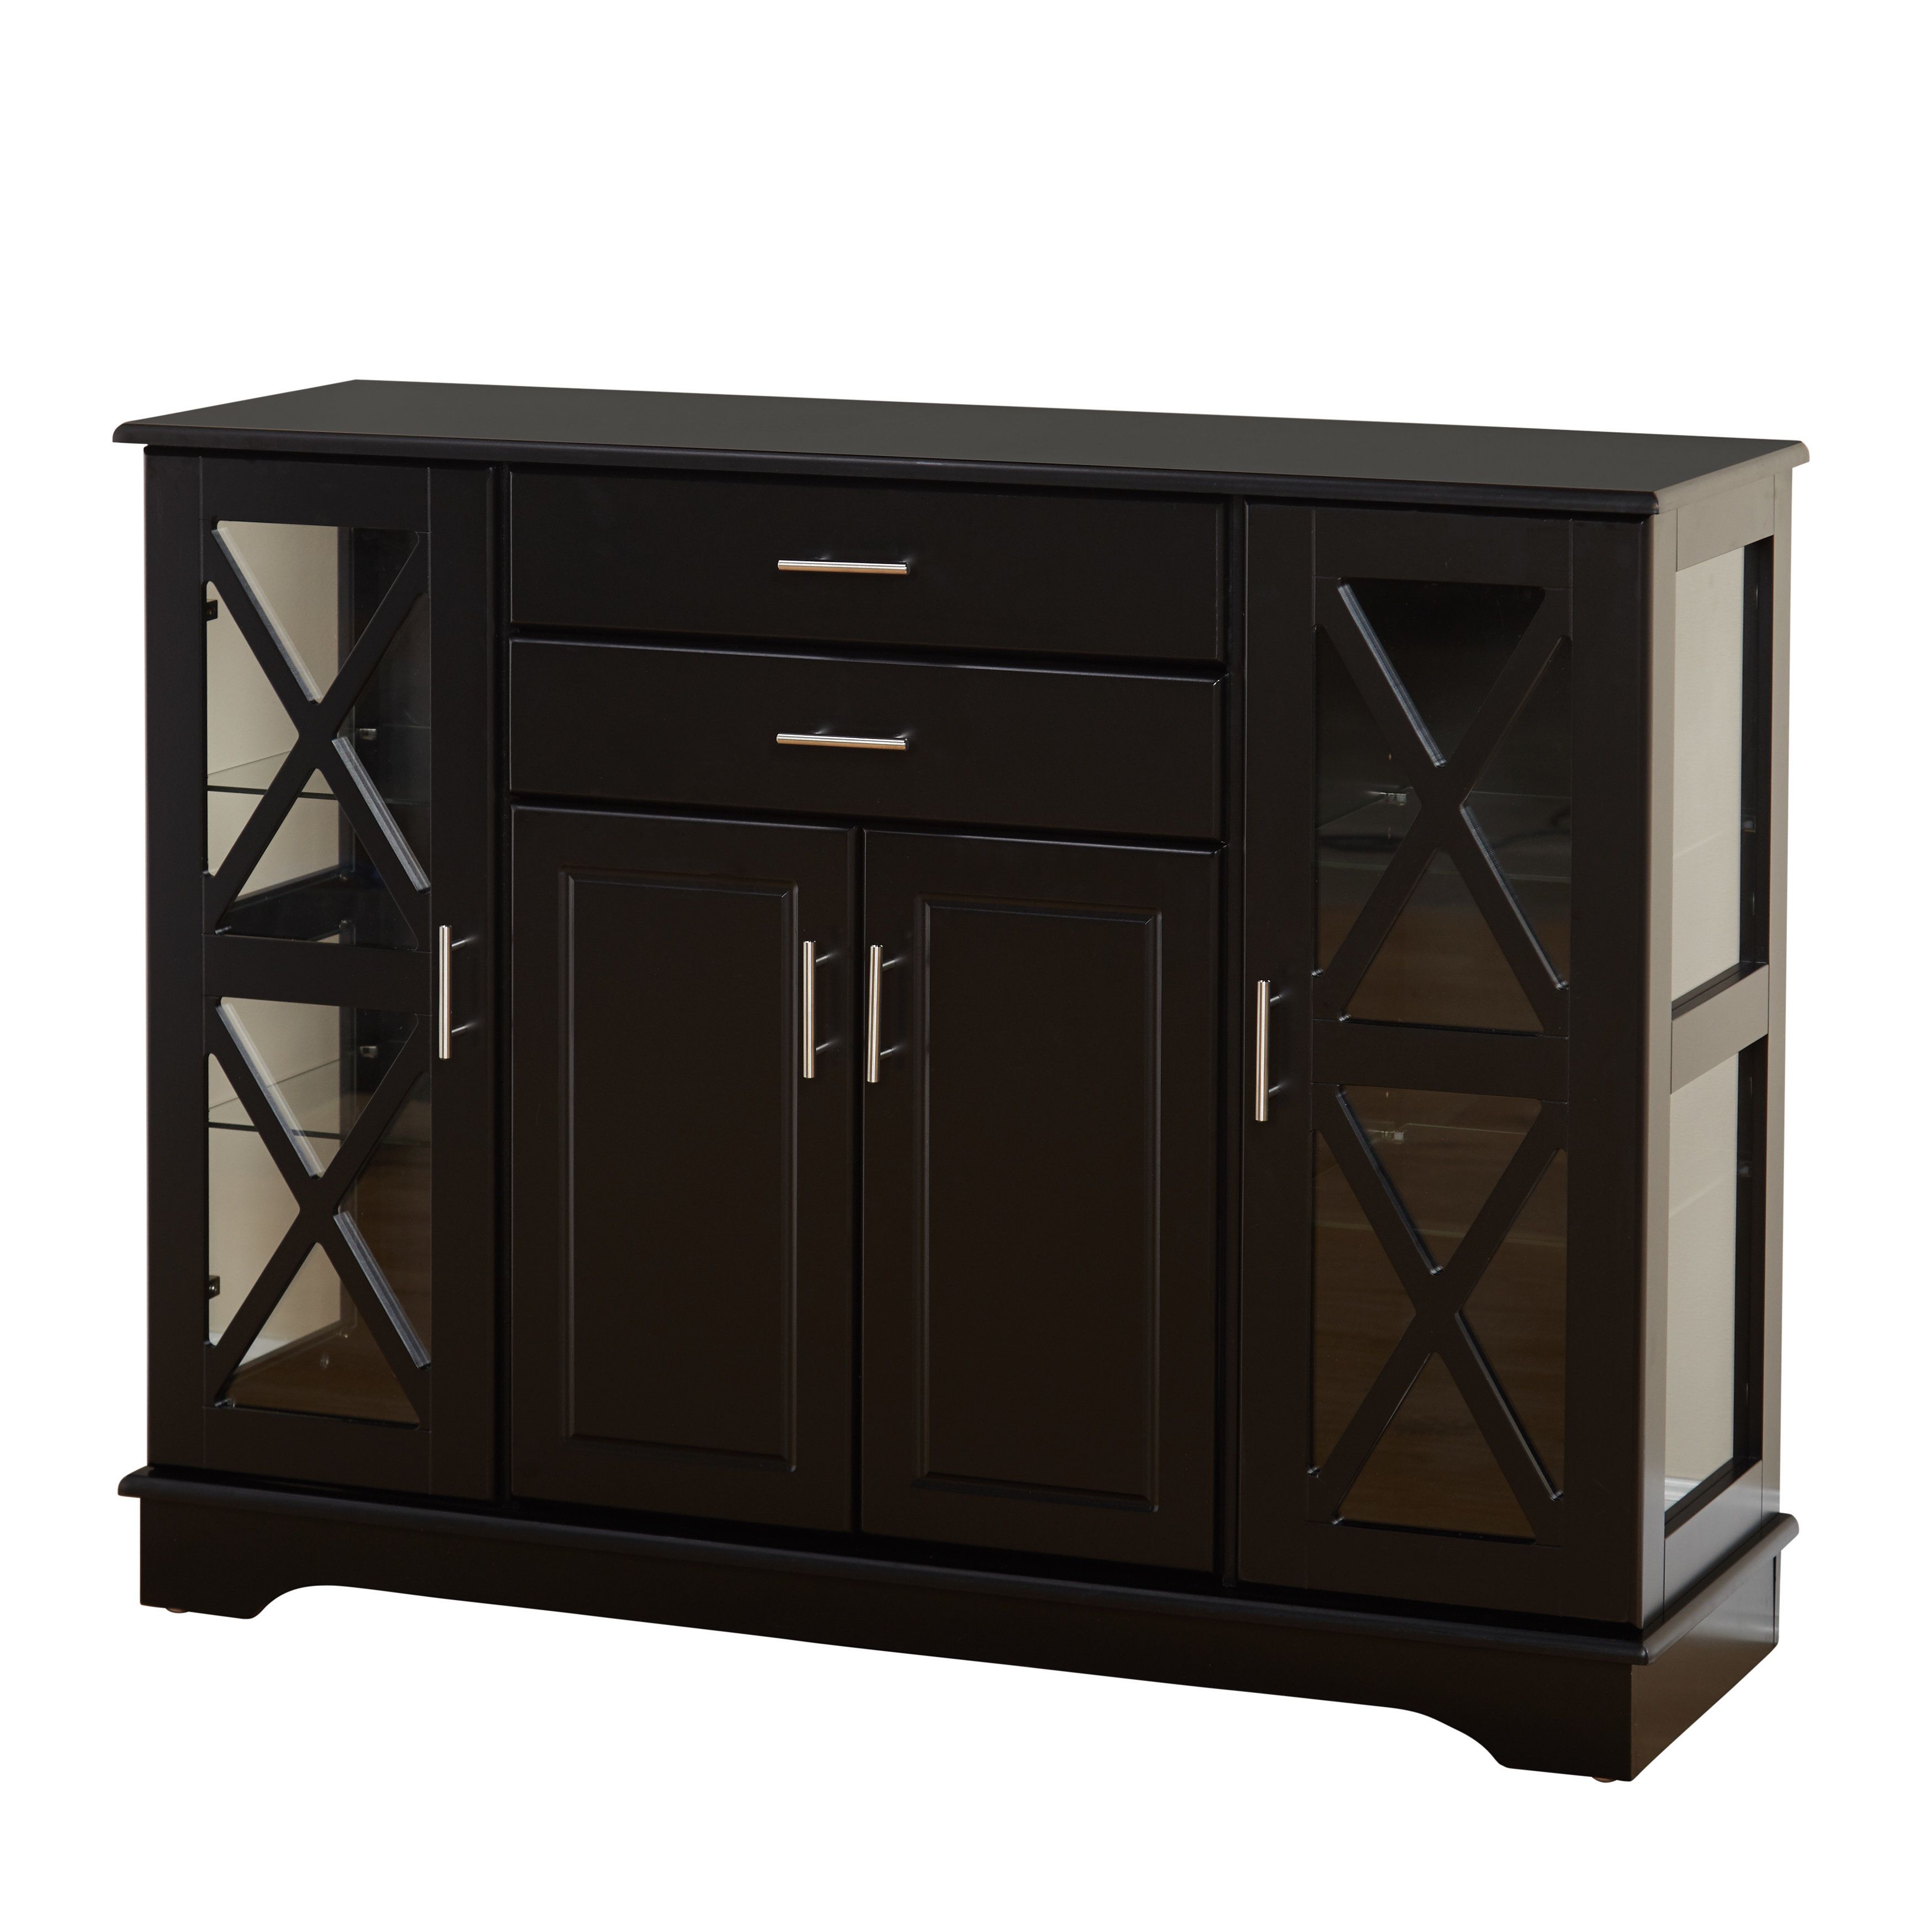 Sideboards & Buffet Tables | Joss & Main In Combs 63 Inch Tv Stands (View 13 of 30)